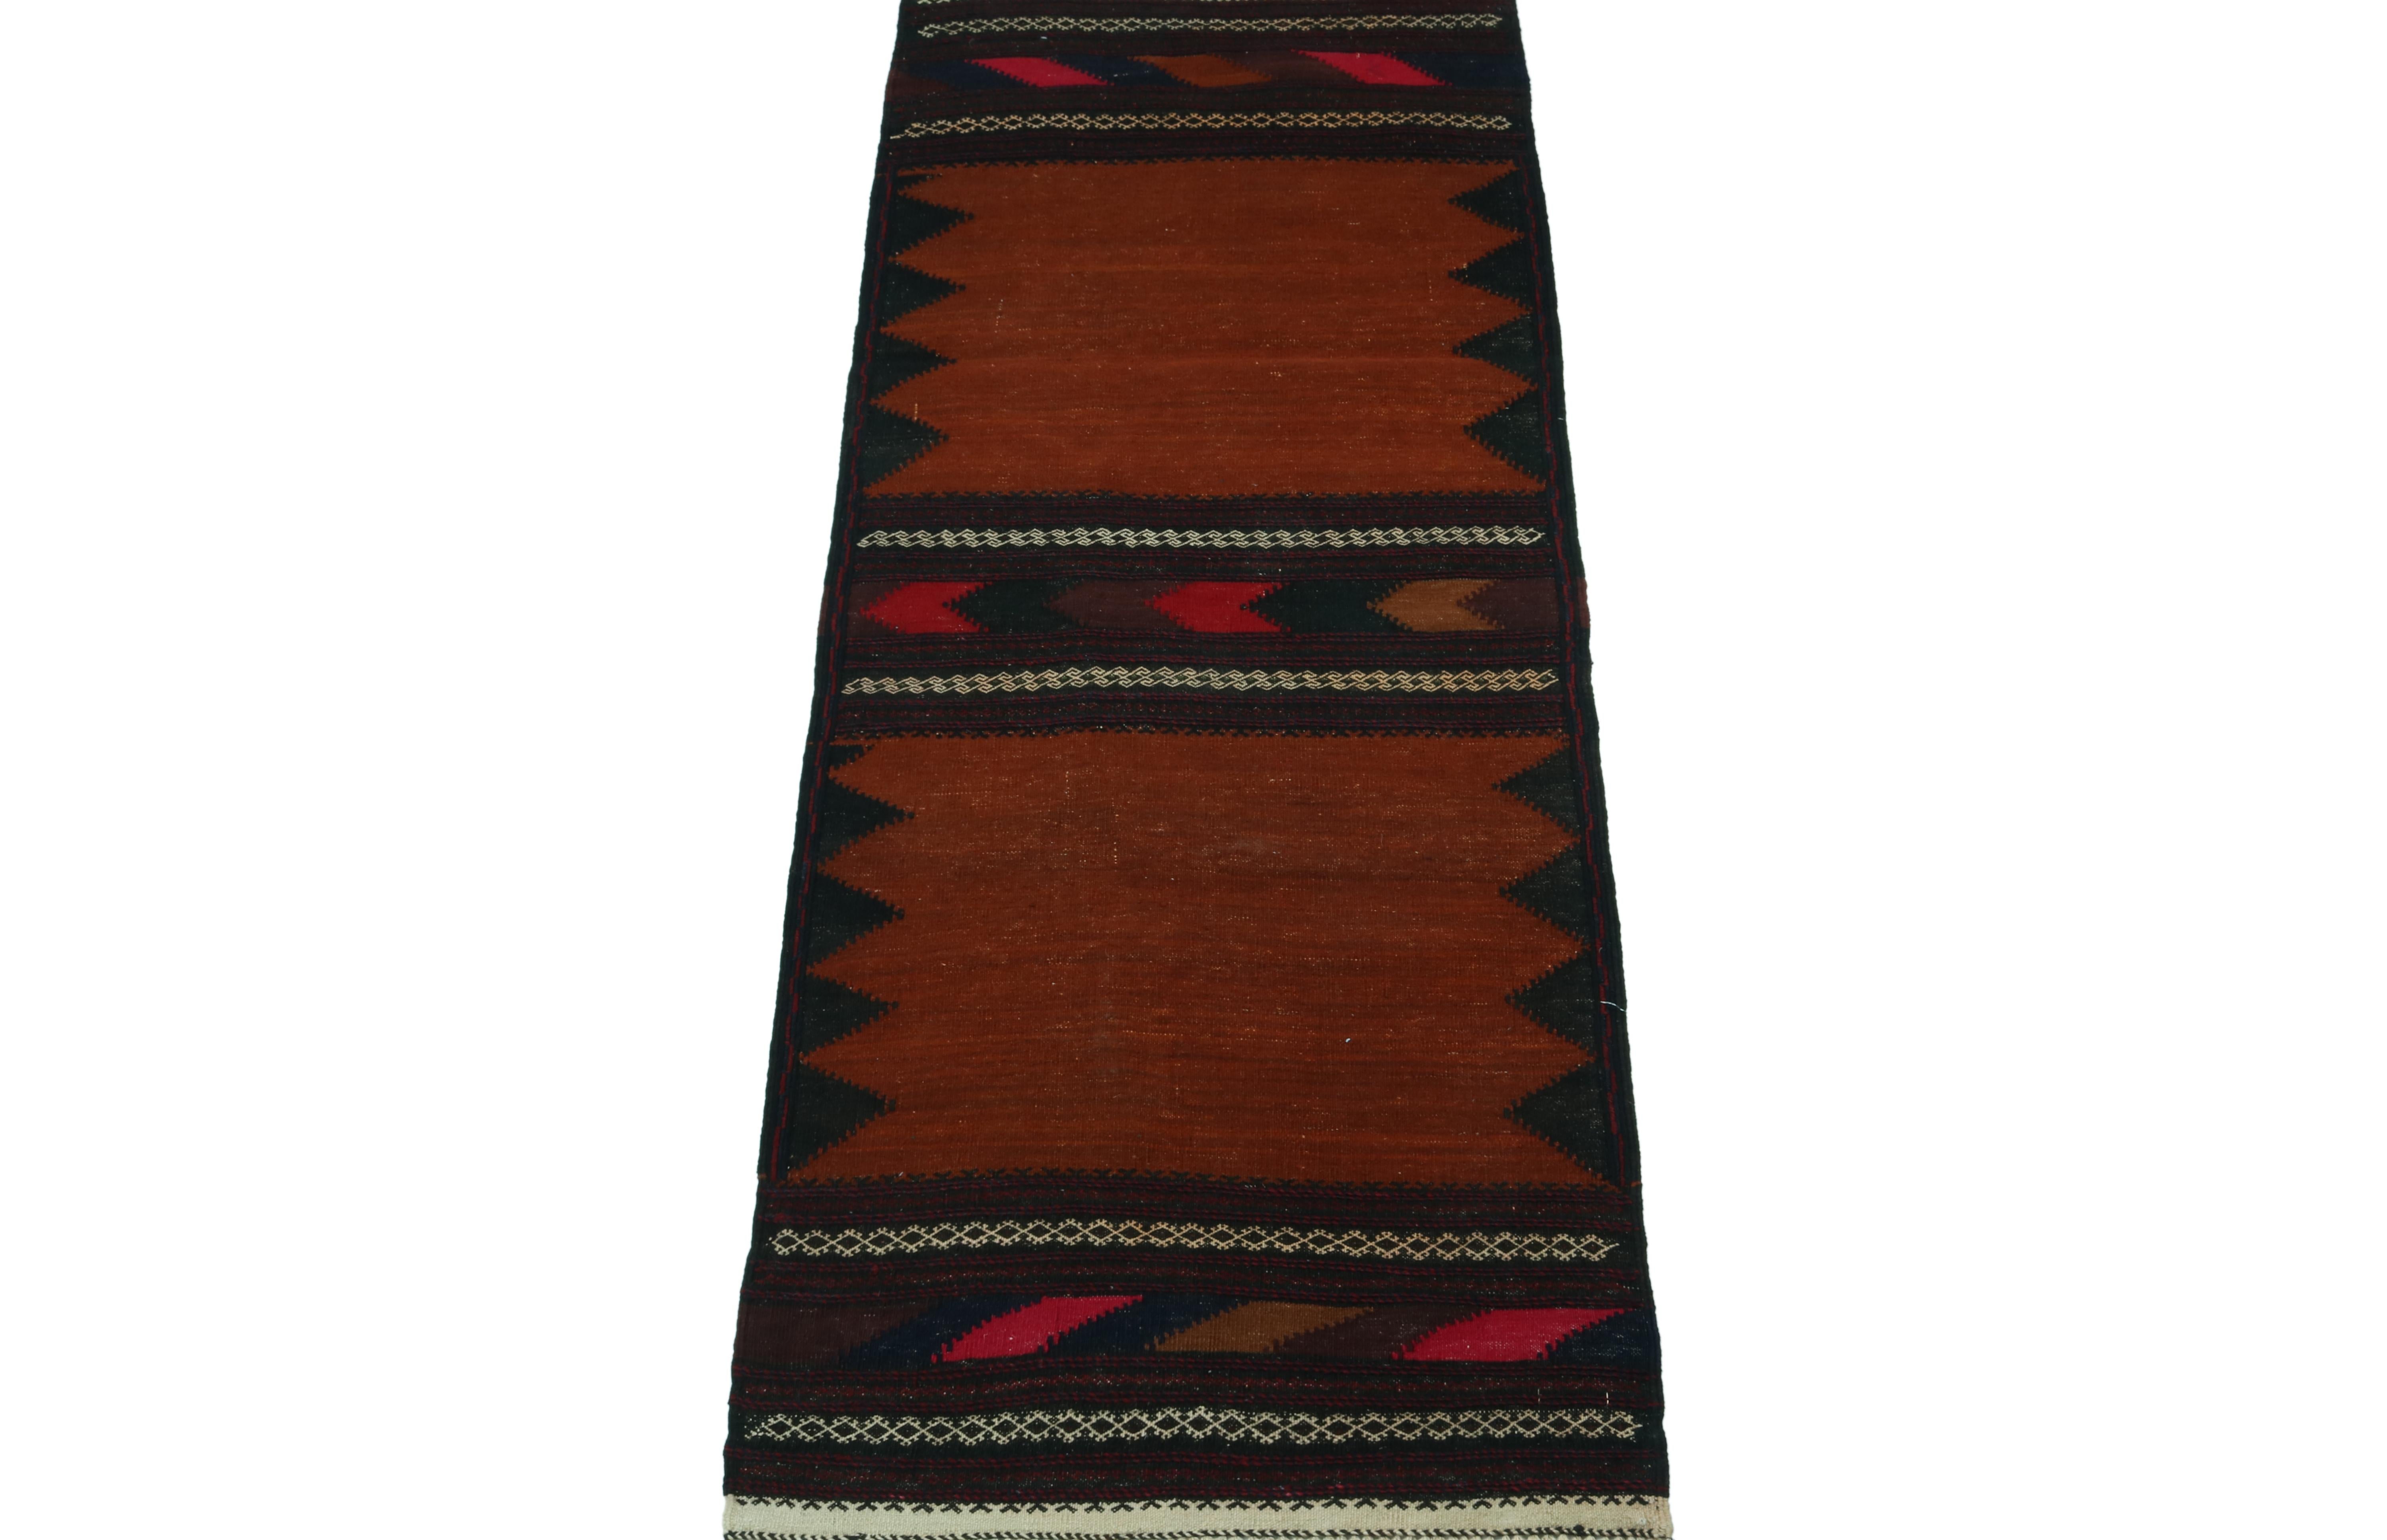 This vintage 2x5 Persian Kilim is a tribal rug of Sofreh provenance—handwoven in wool circa 1970-1980.

Further on the design:

This piece employs an open field style in rich chocolate brown and rust colors, as well as vibrant geometric patterns